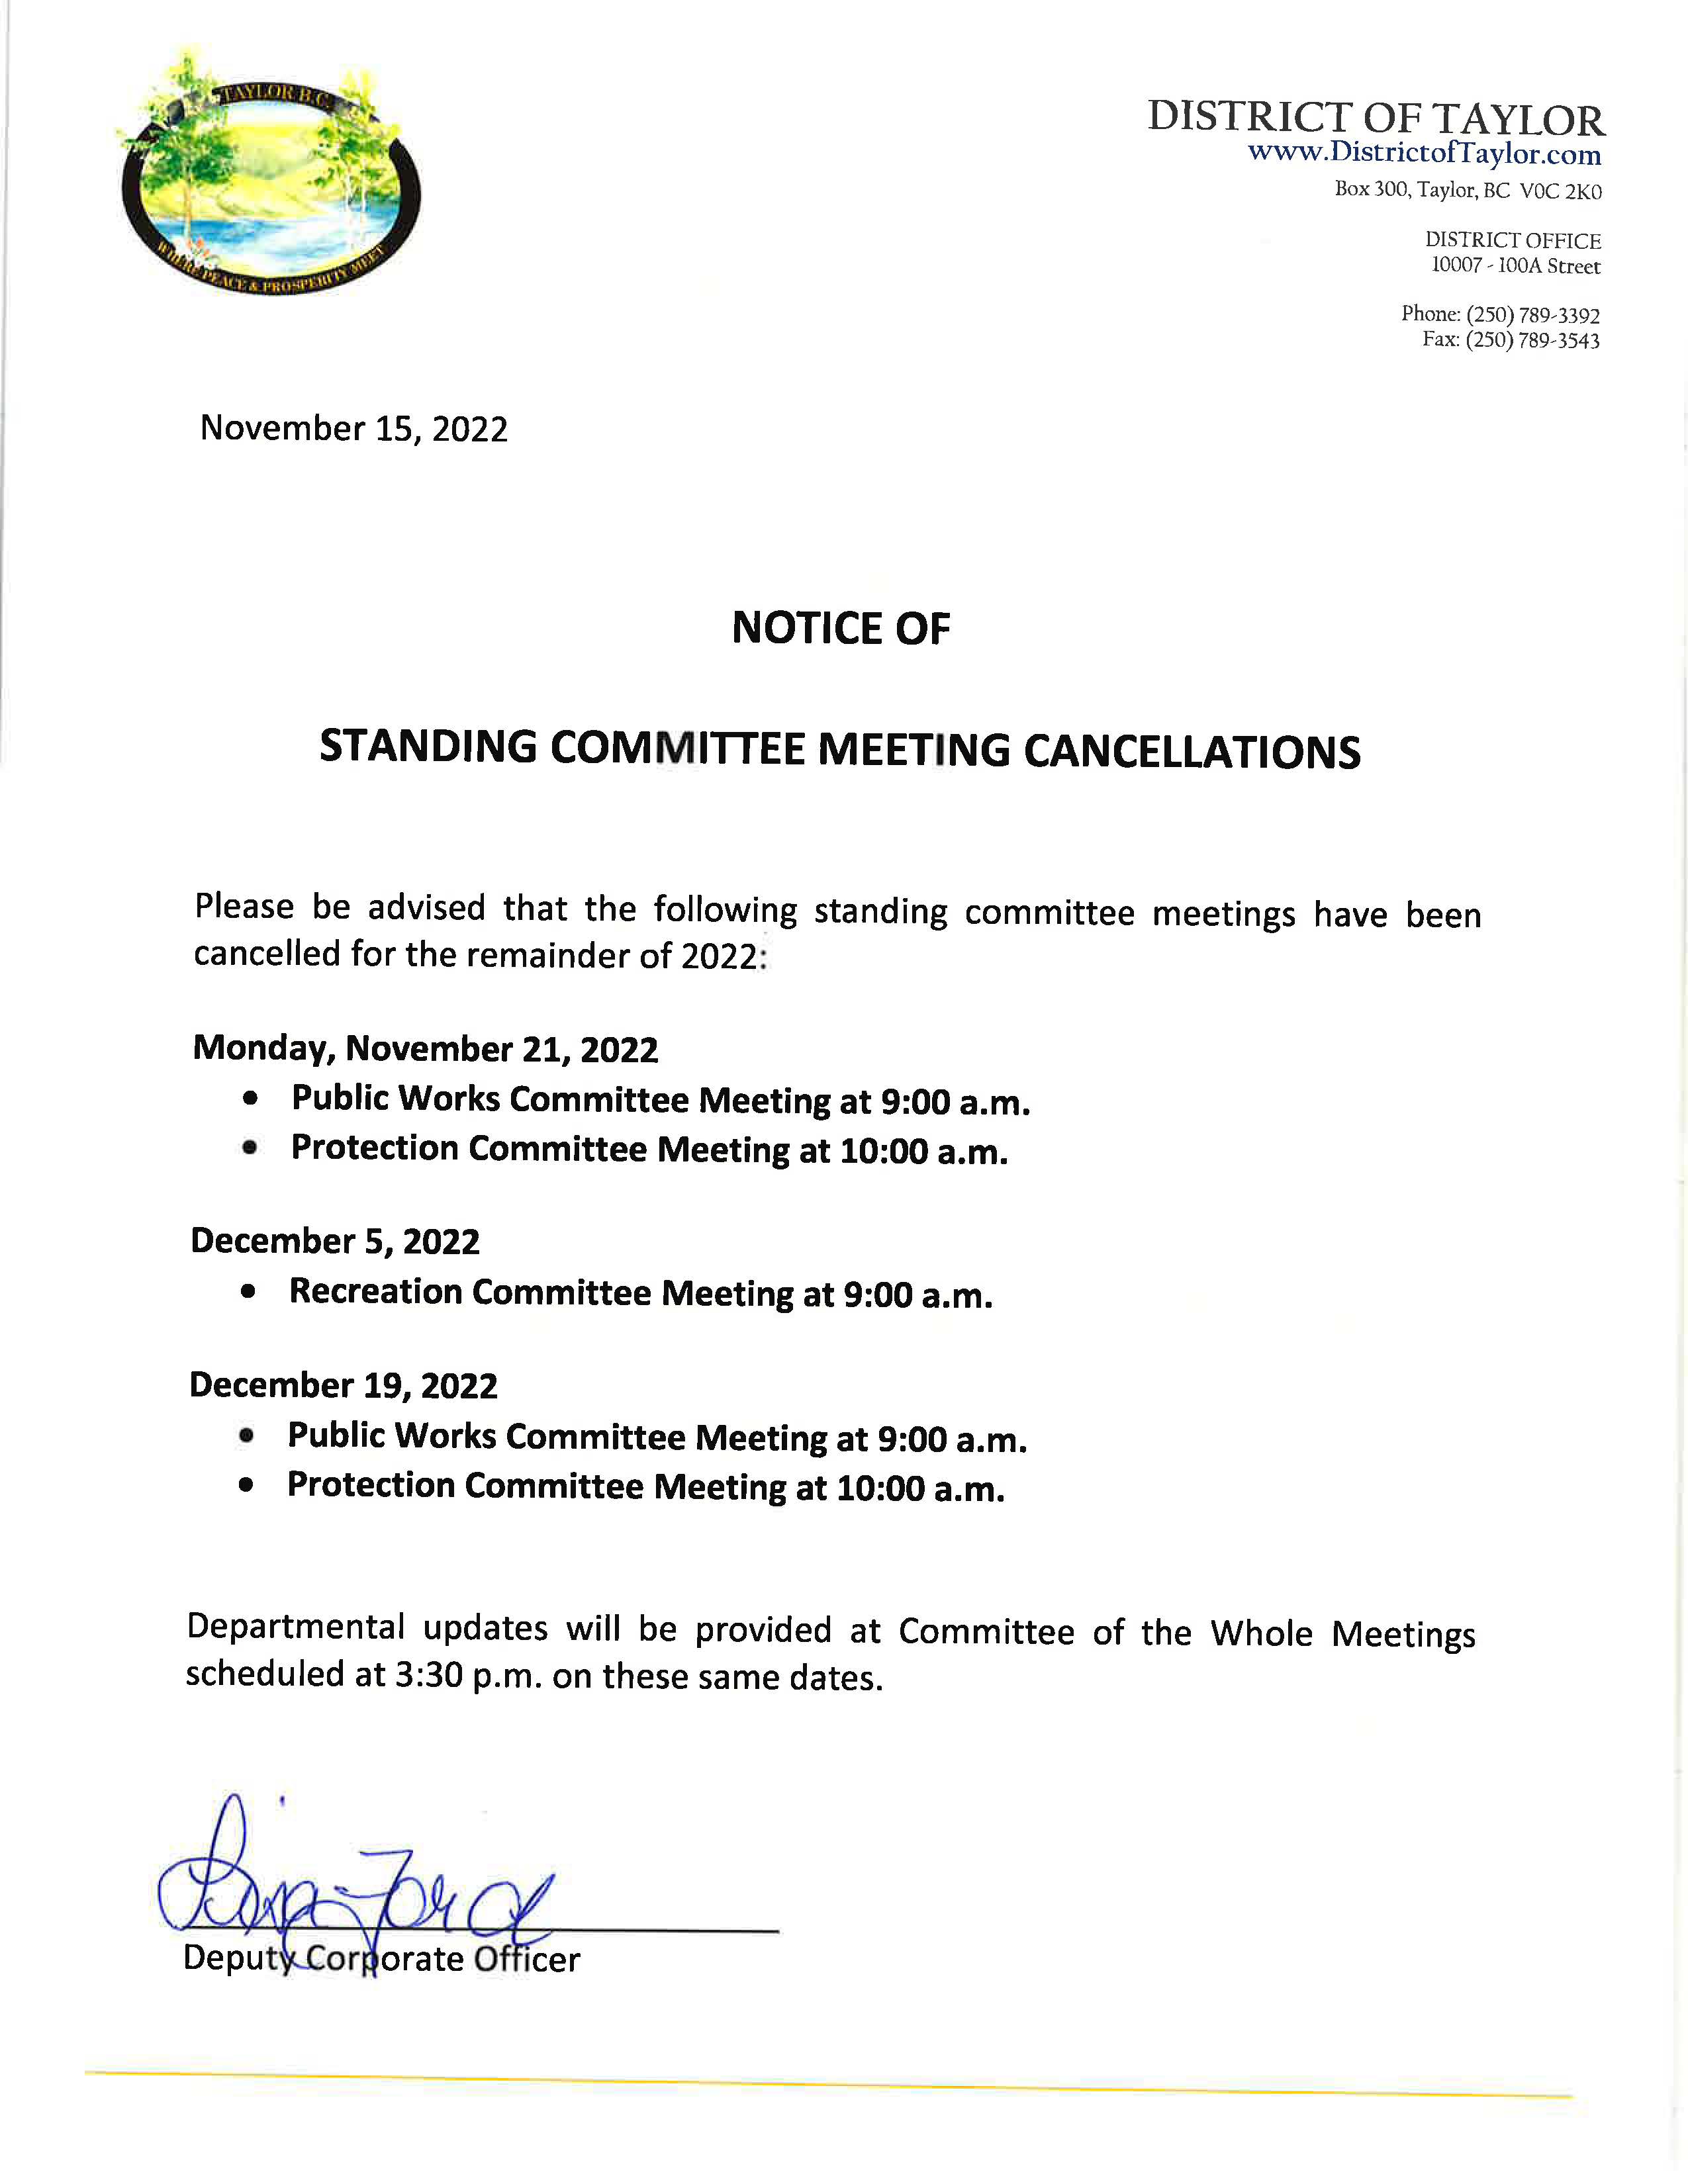 Notice of Standing Committee Meeting Cancellations